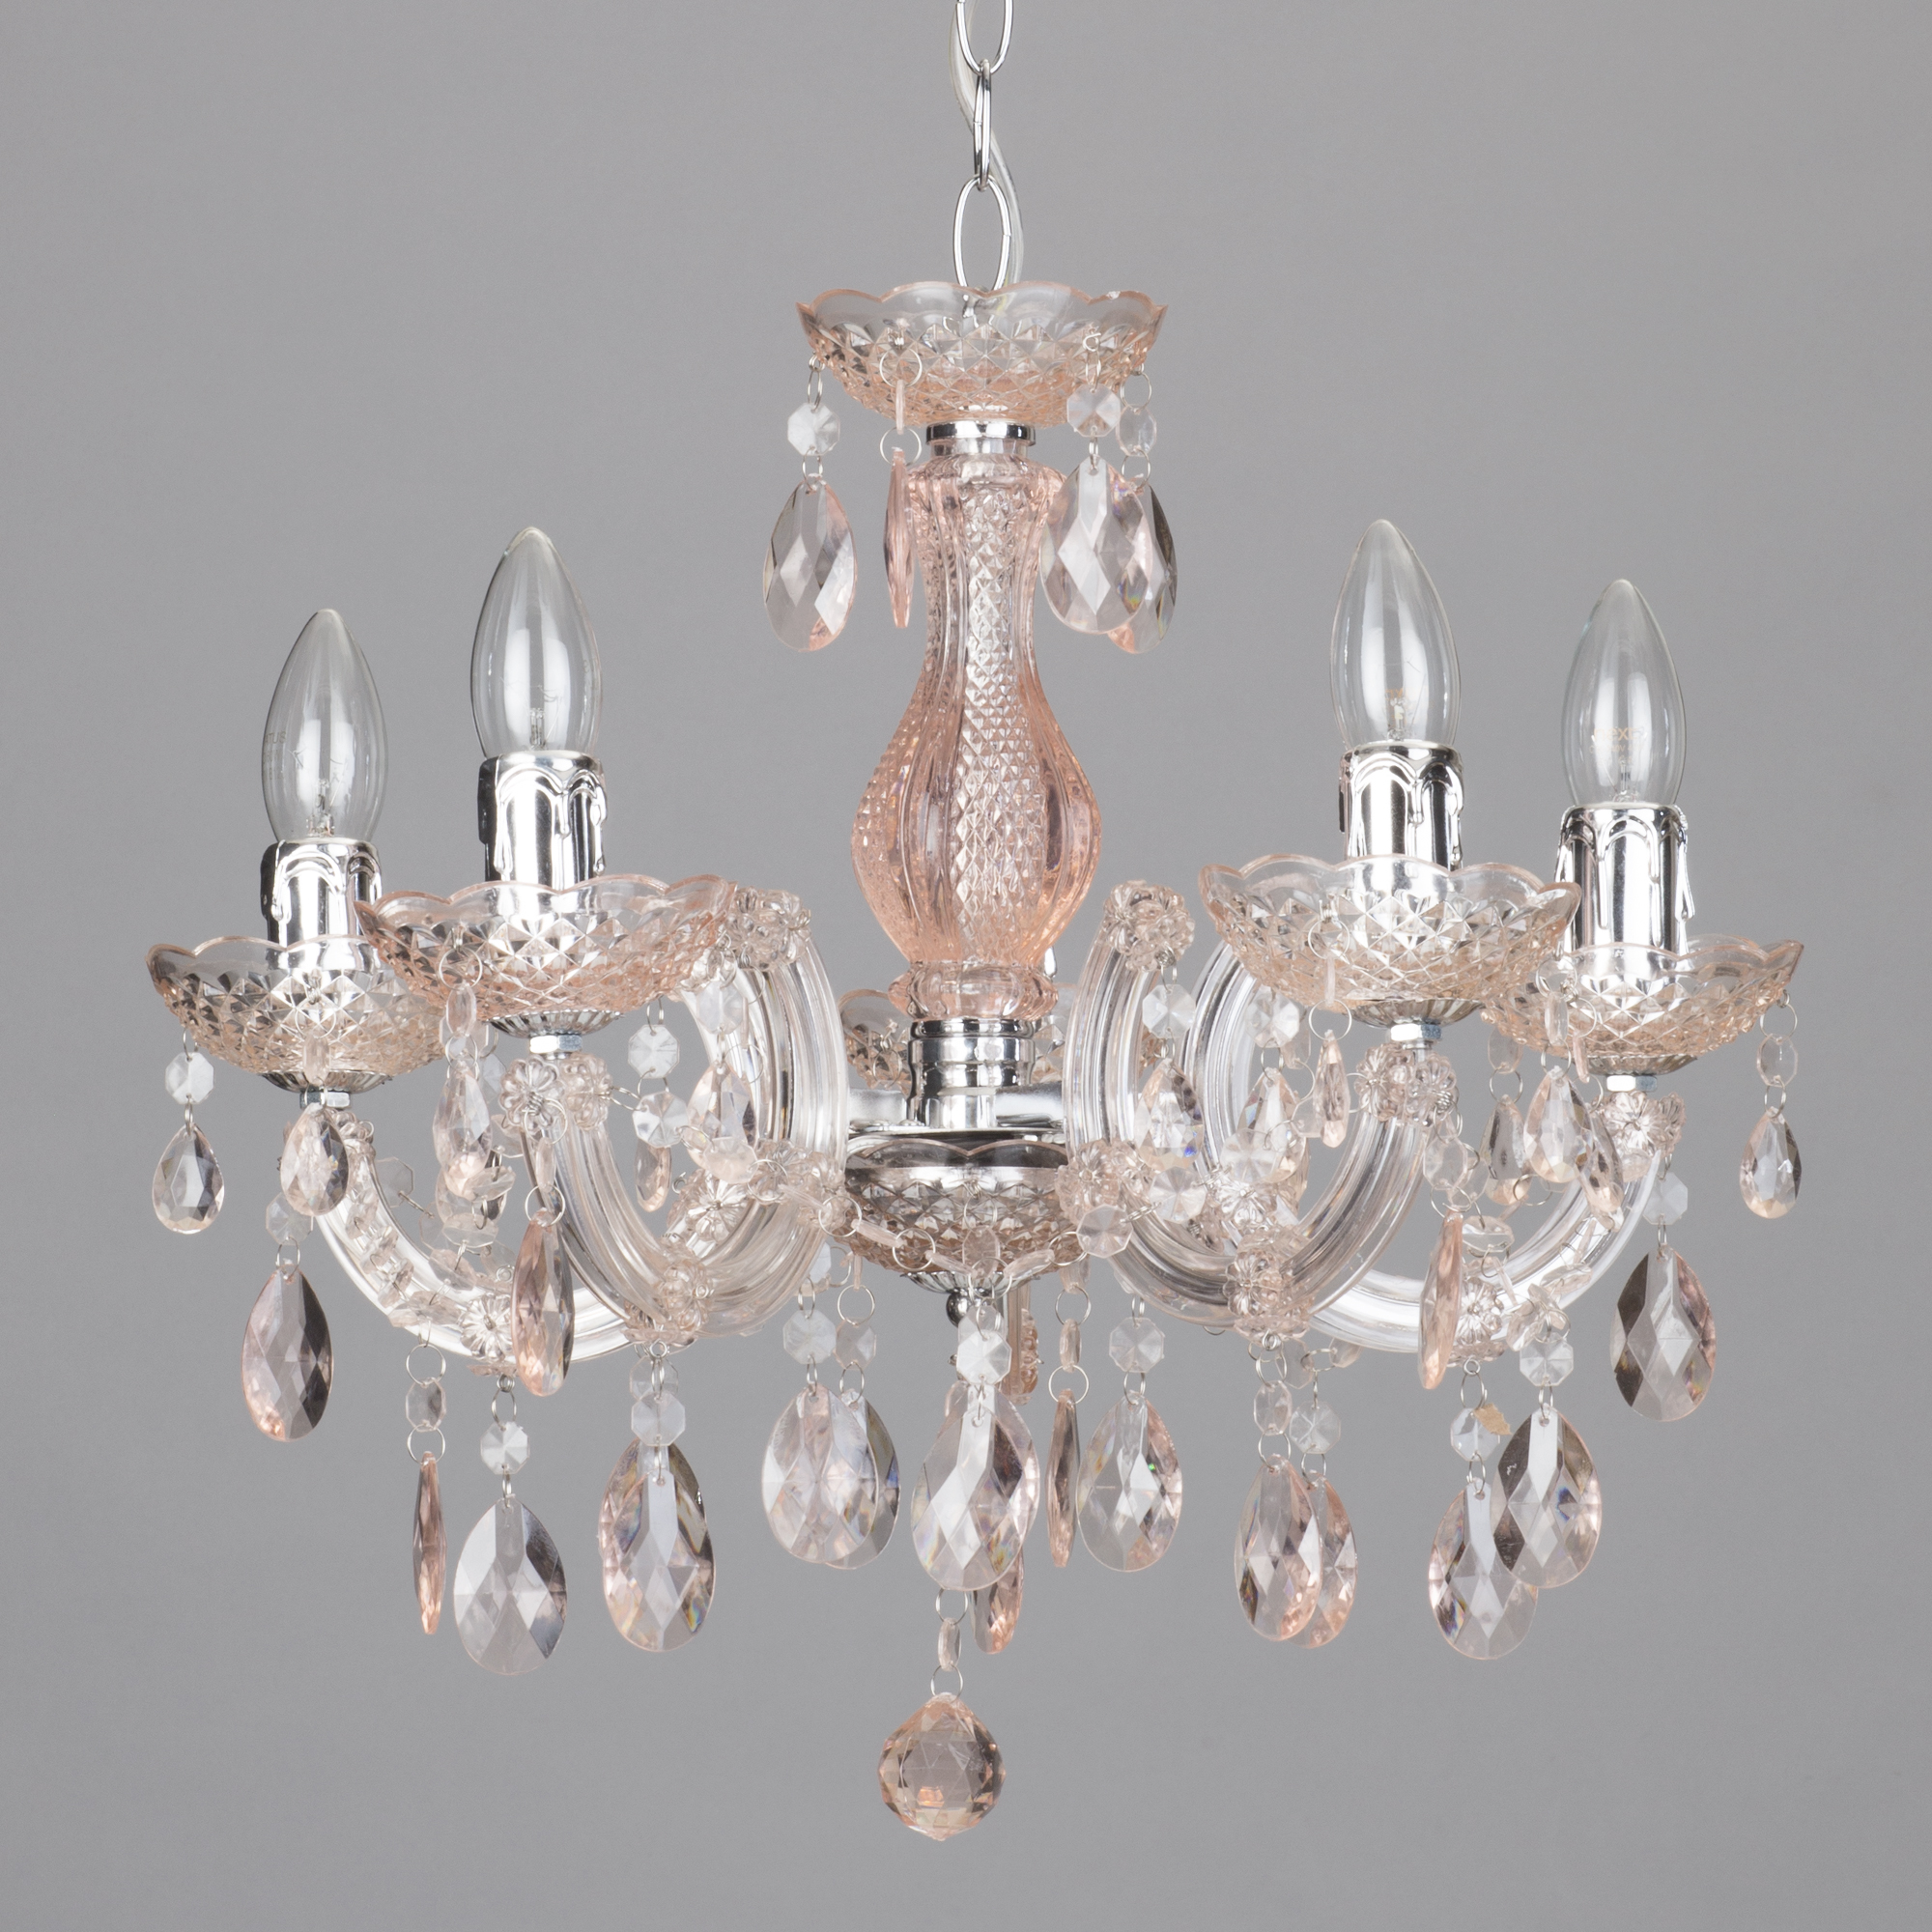 Marie Therese 5 Light Ceiling Chandelier Light in Smoke E14 Fitting Litecraft